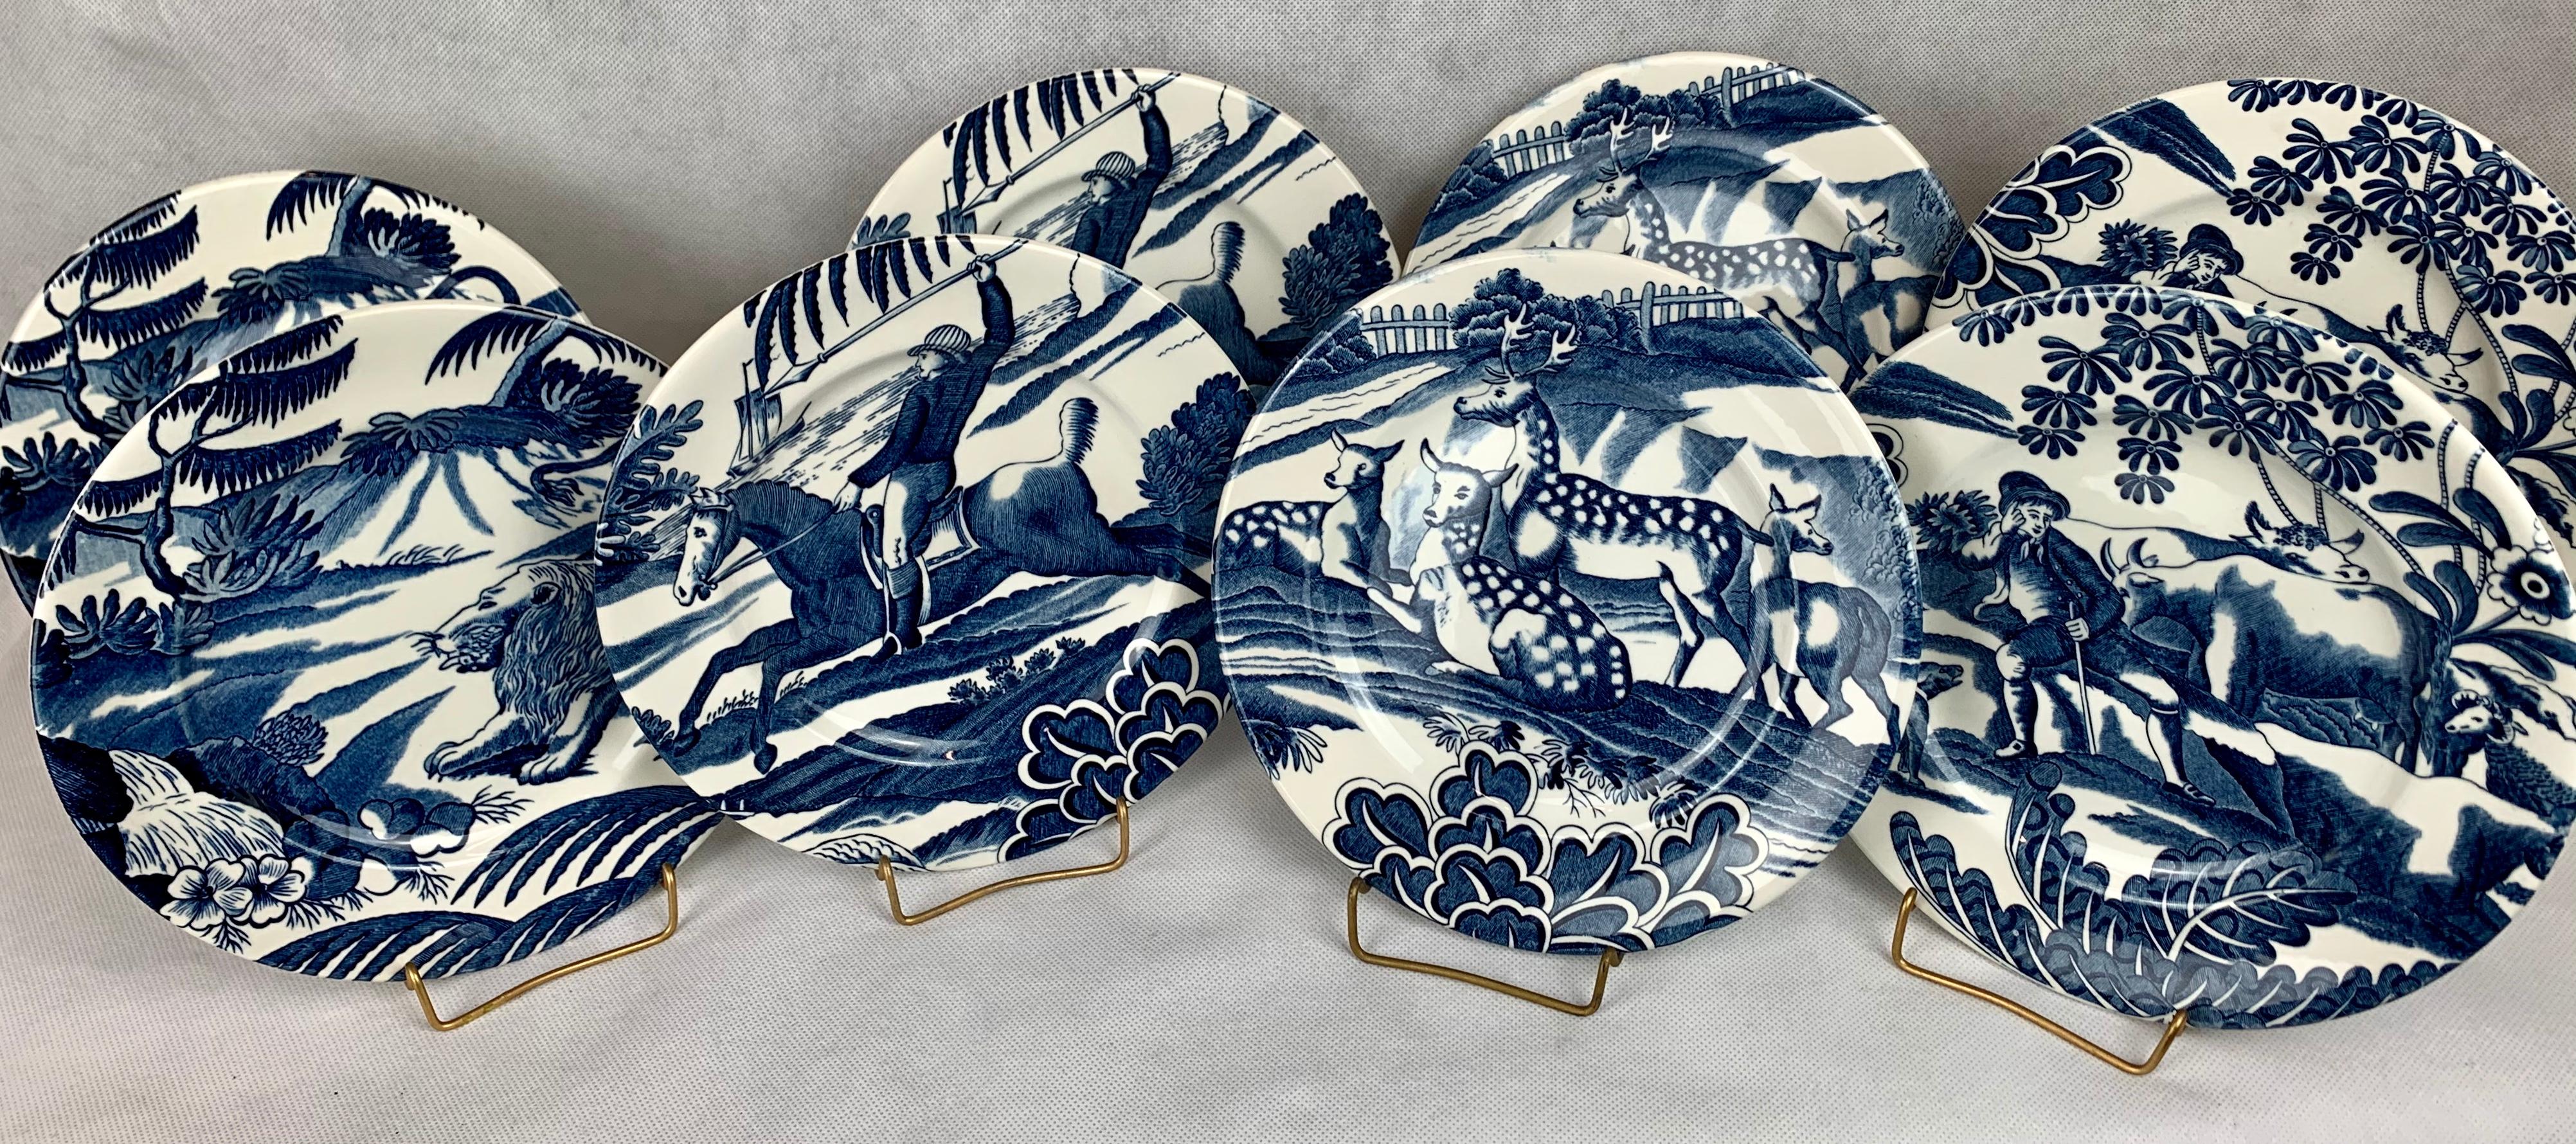 Set of 8 animal motif plates designed by Tiffany & Co. and made by Johnson Brothers in England. There are four designs and we have two of each.  The set of plates are done in a lively cobalt blue on white and would be suitable on a table or hung on